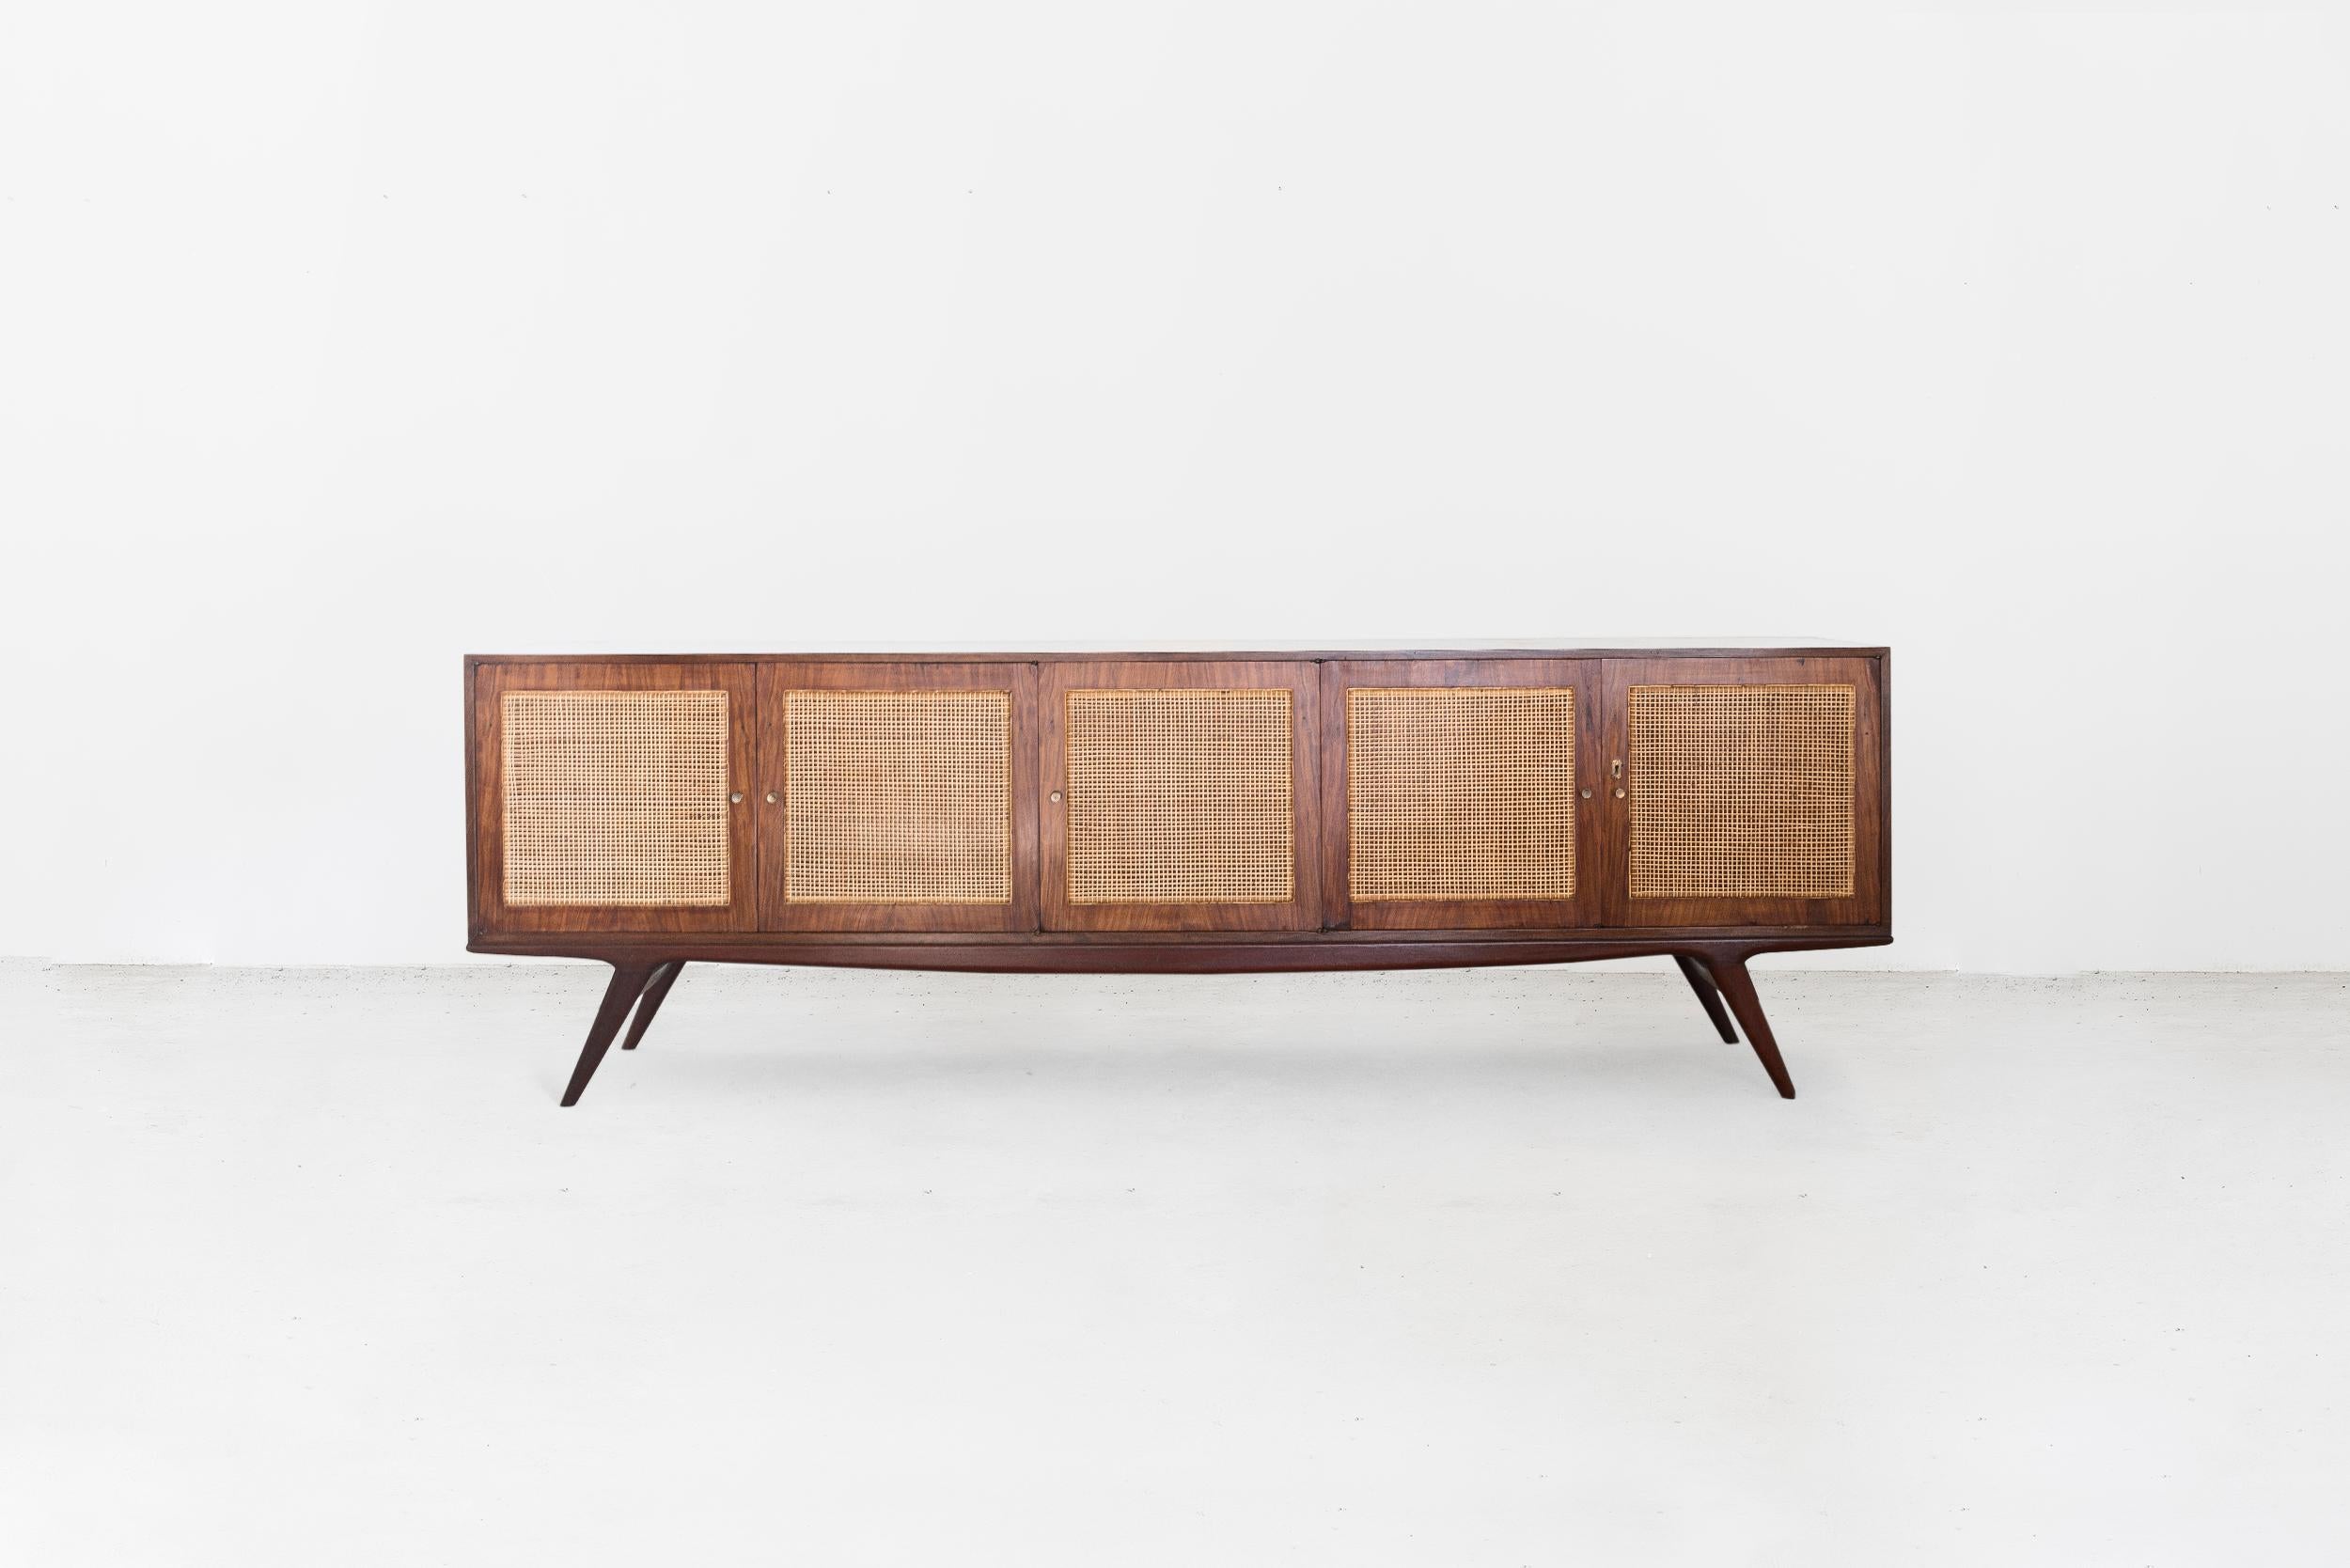 Carlos Hauner & Martin Eisler
Buffet with five doors
Manufactured by Forma Moveis
Brazil, 1950
Caviuna wood, cane
From the archives of Side Gallery, Barcelona 

Measurements
268 cm x 43 cm x 81 H cm
105.52 in x 16.92 in x 31.88 H